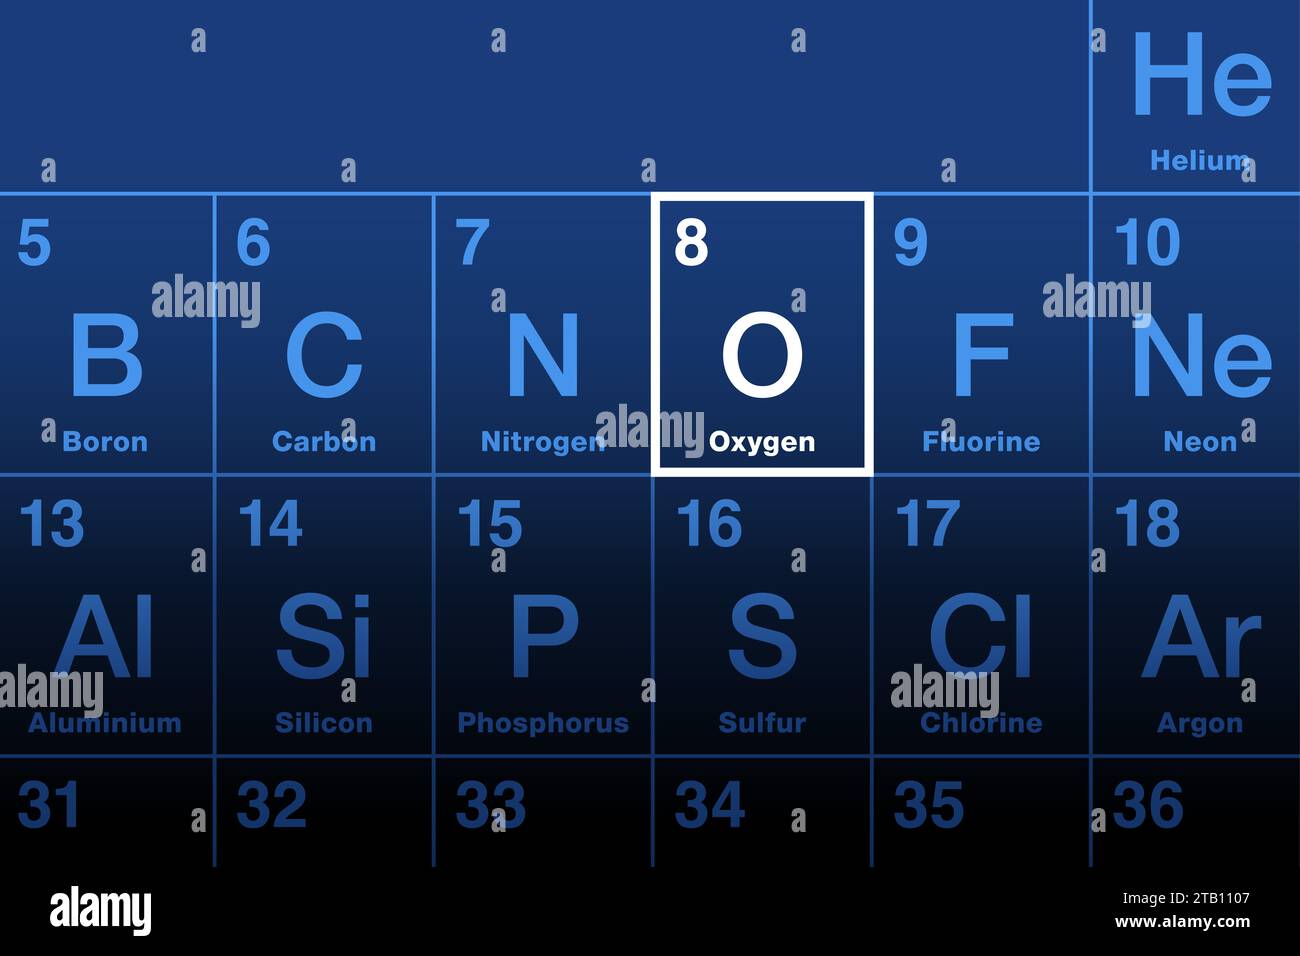 Oxygen, element on the periodic table, with the element symbol O and the atomic number 8. Highly reactive nonmetal and oxidizing agent, forming oxides. Stock Photo